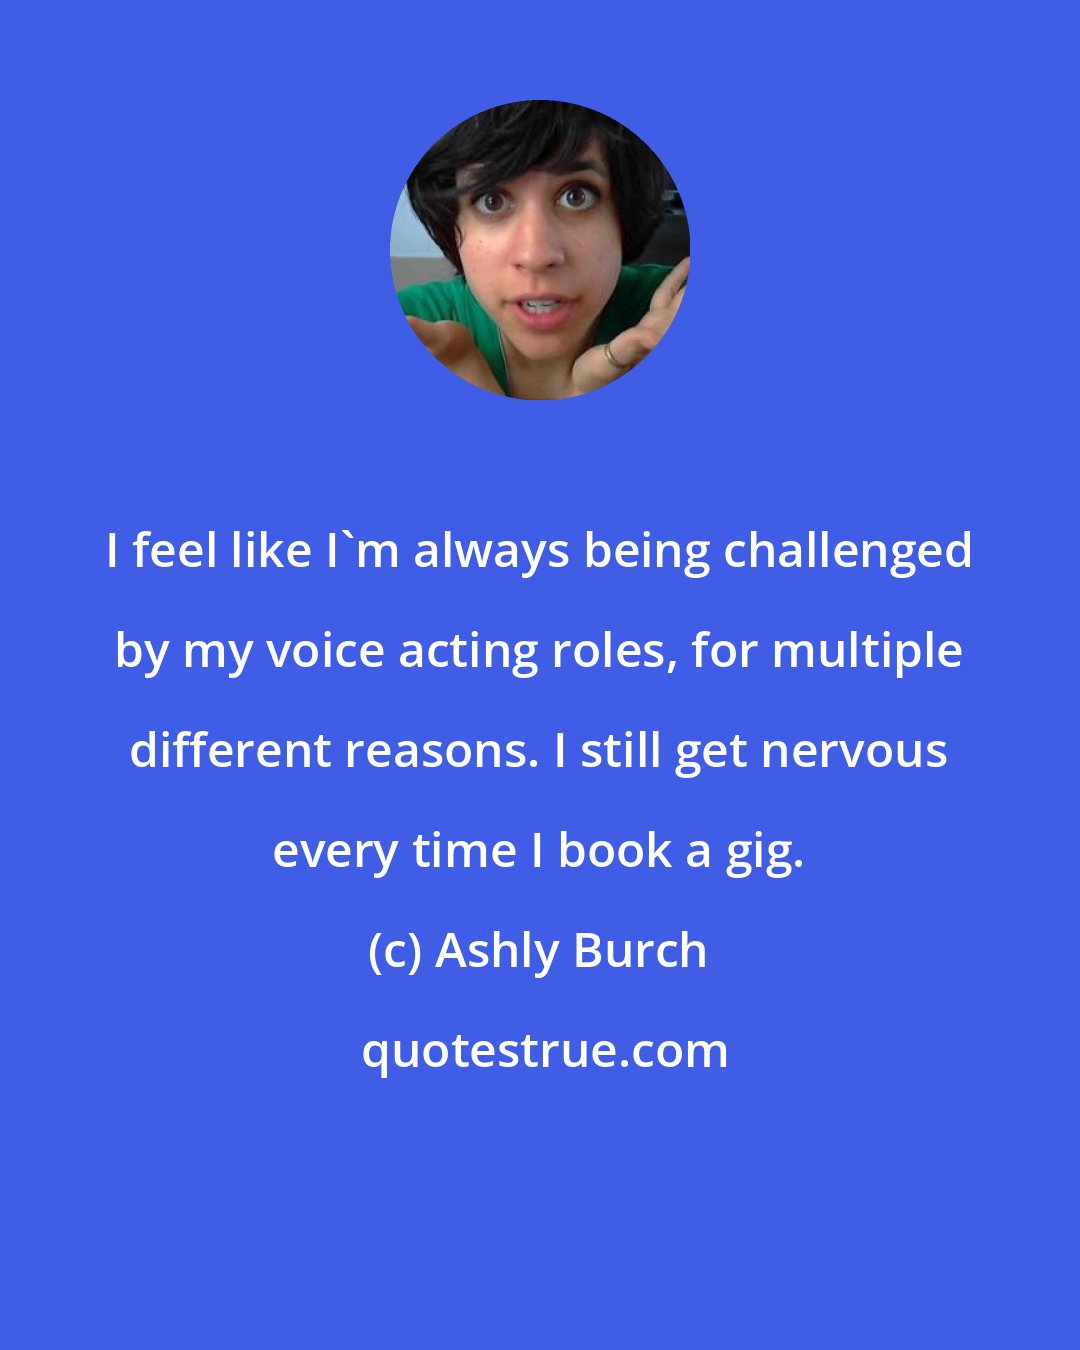 Ashly Burch: I feel like I'm always being challenged by my voice acting roles, for multiple different reasons. I still get nervous every time I book a gig.